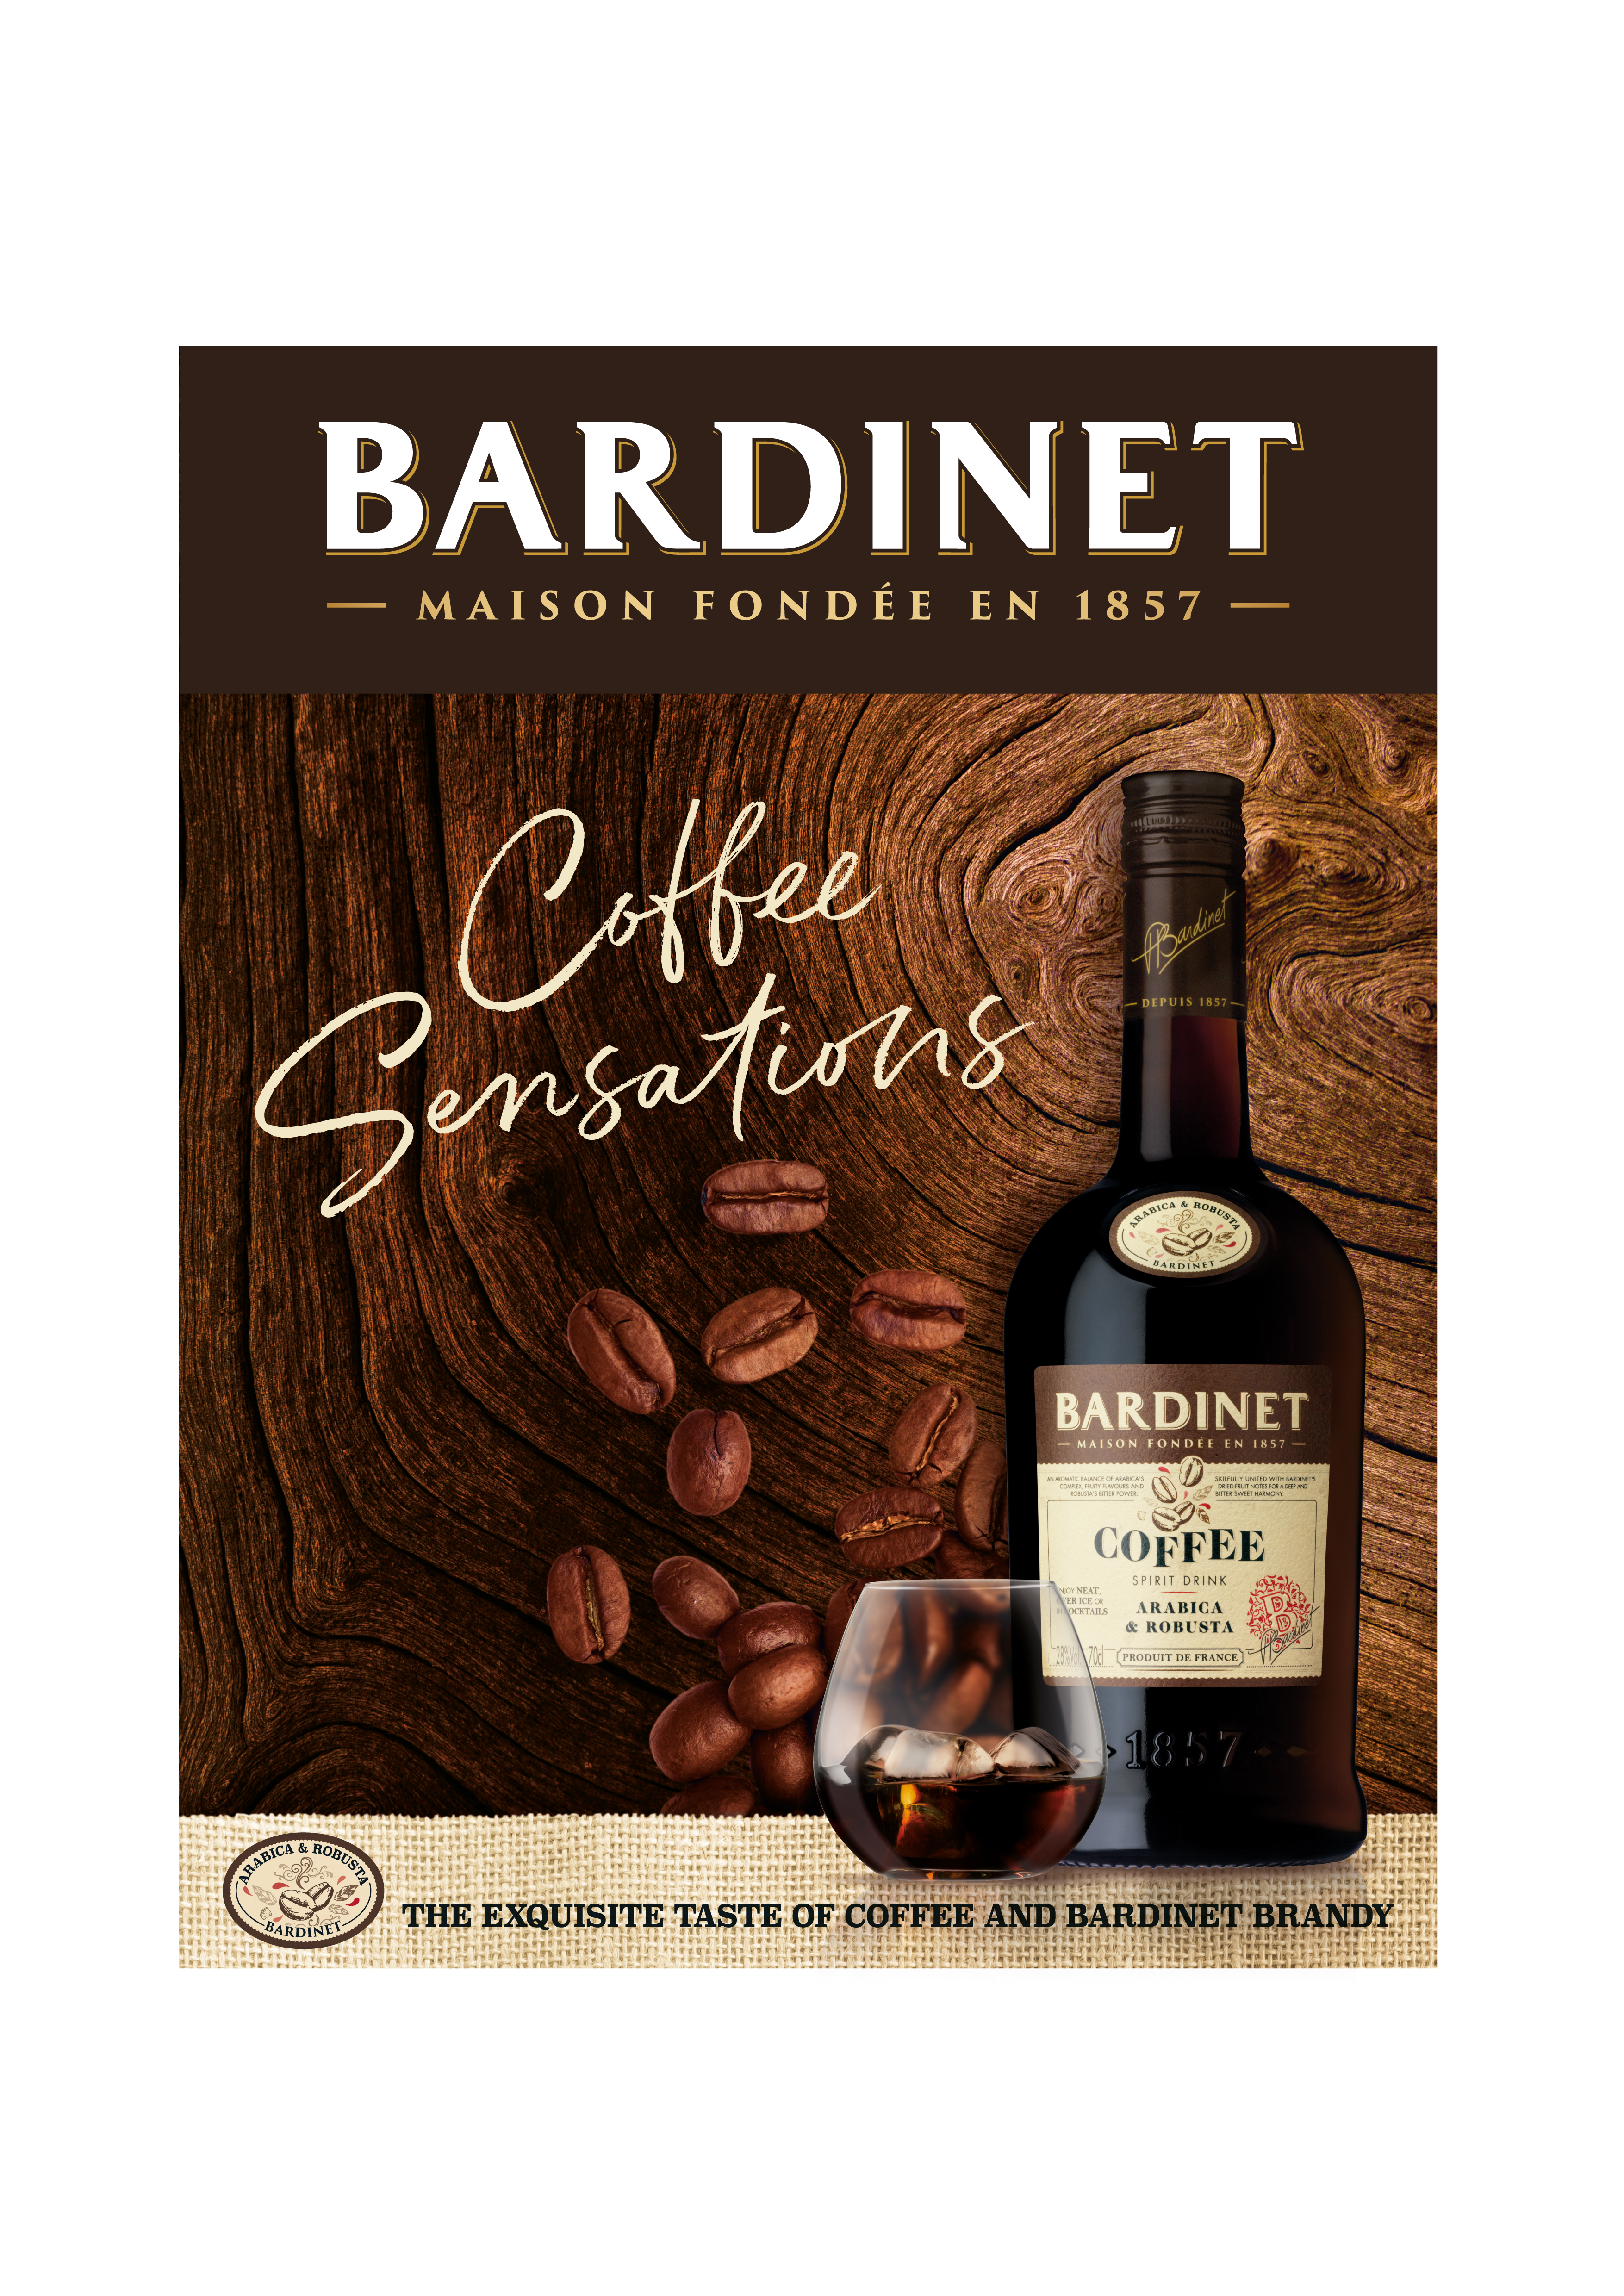 Bardinet coffee bottle and glass: French brandy maker launches Bardinet Coffee as part of new range